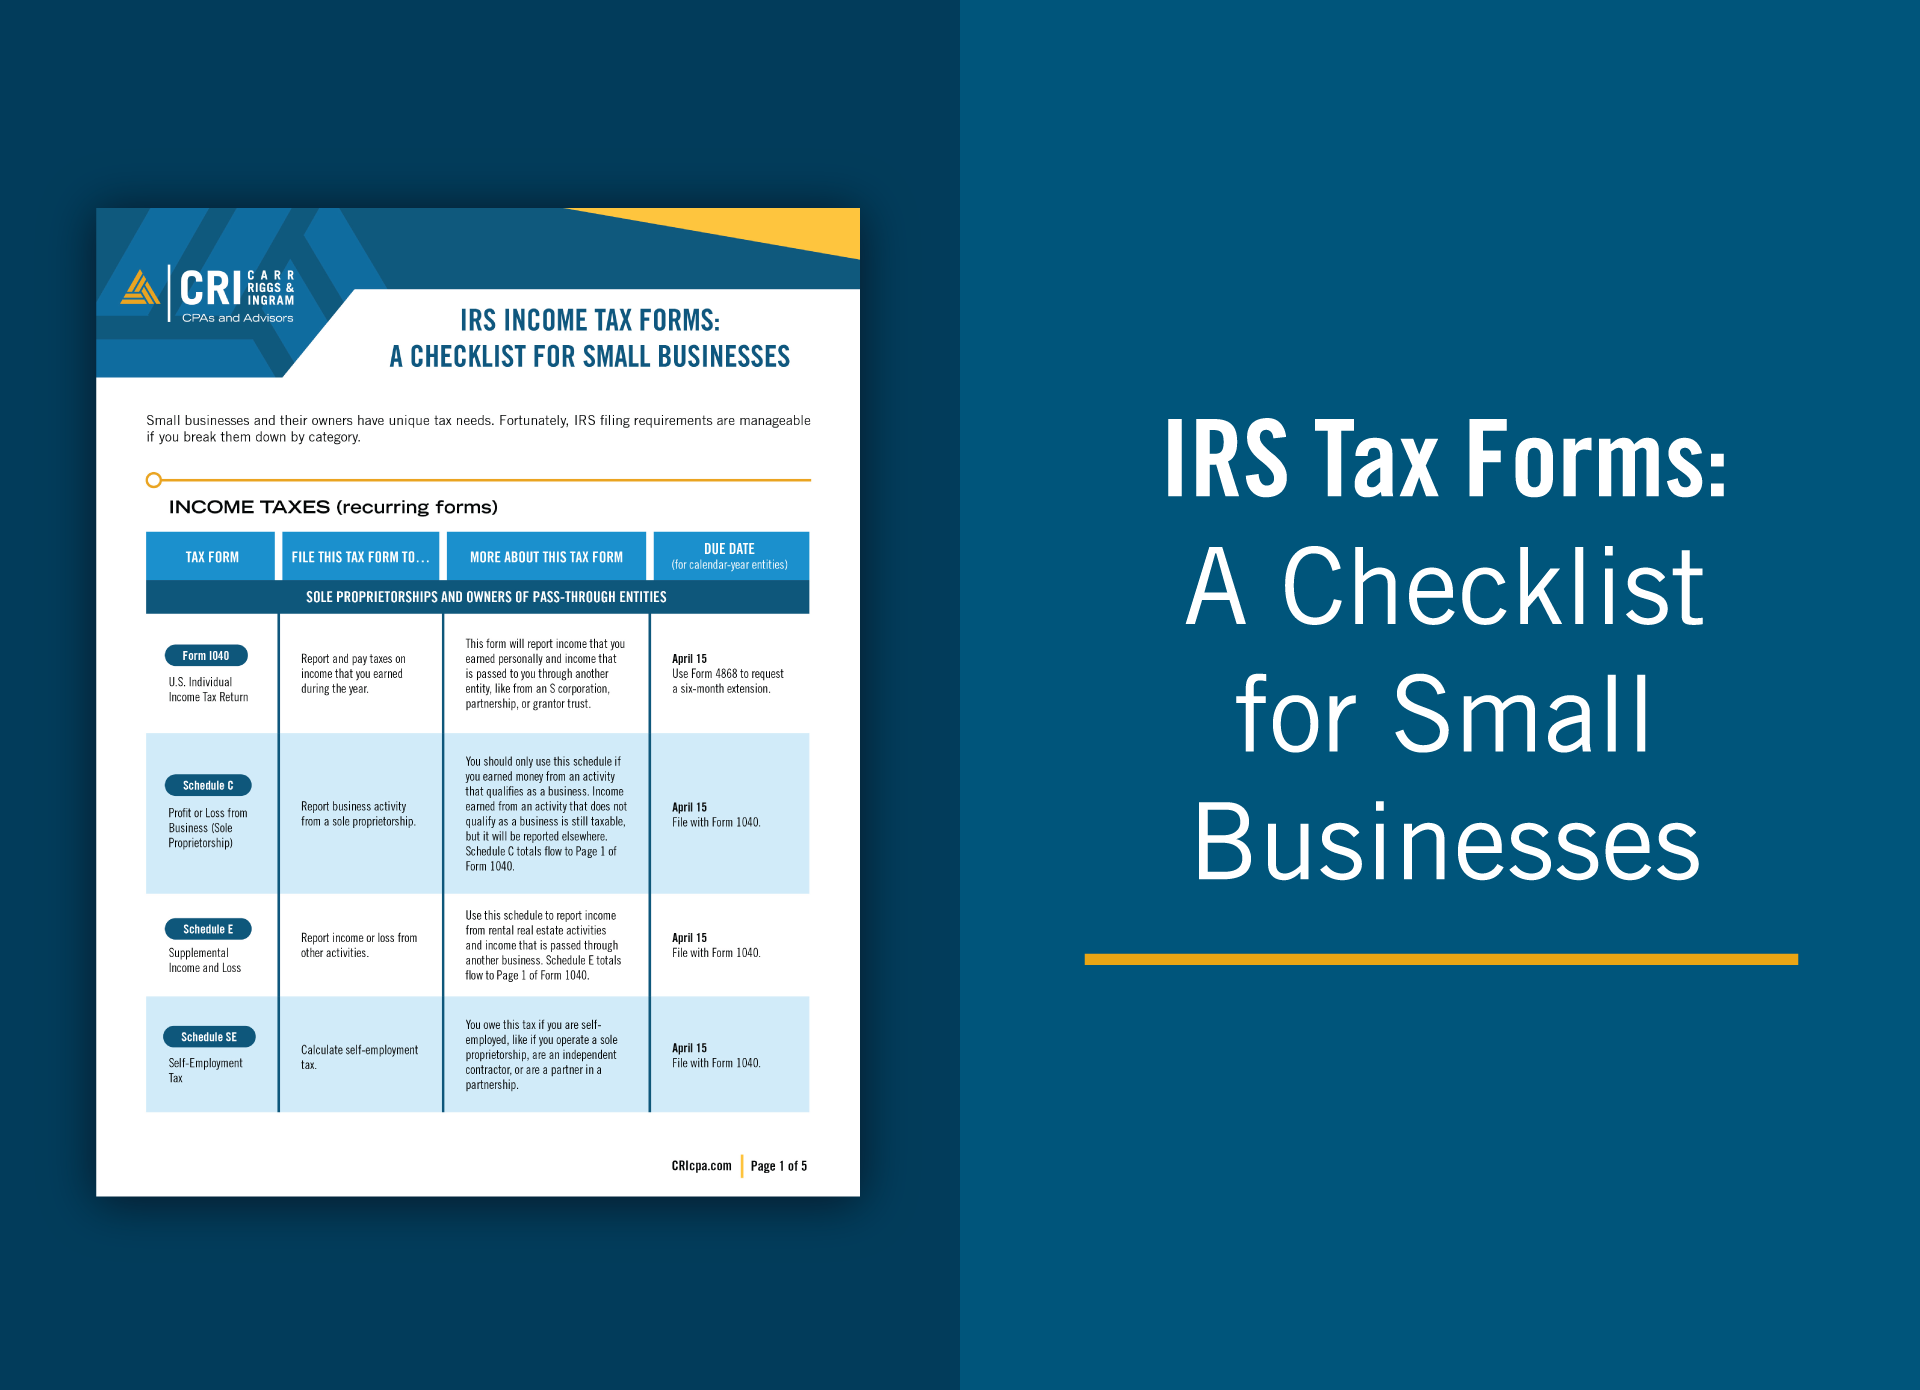 https://cricpa.com/wp-content/uploads/2021/08/irs-tax-forms.png